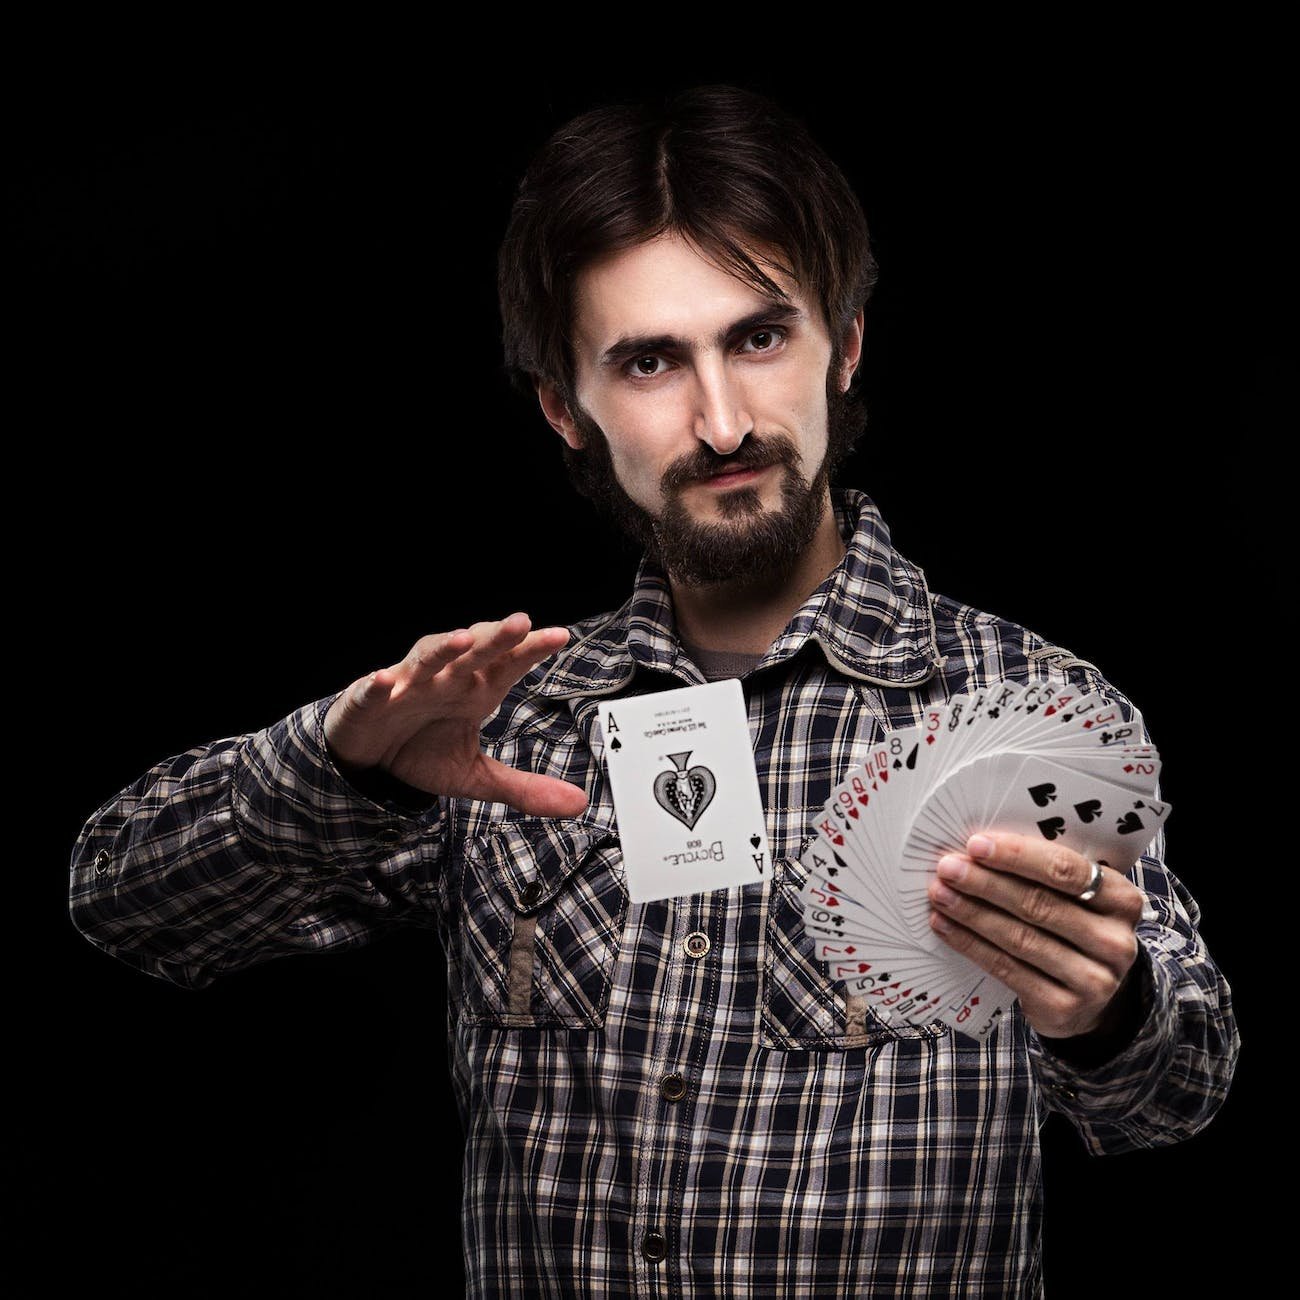 person doing card trick